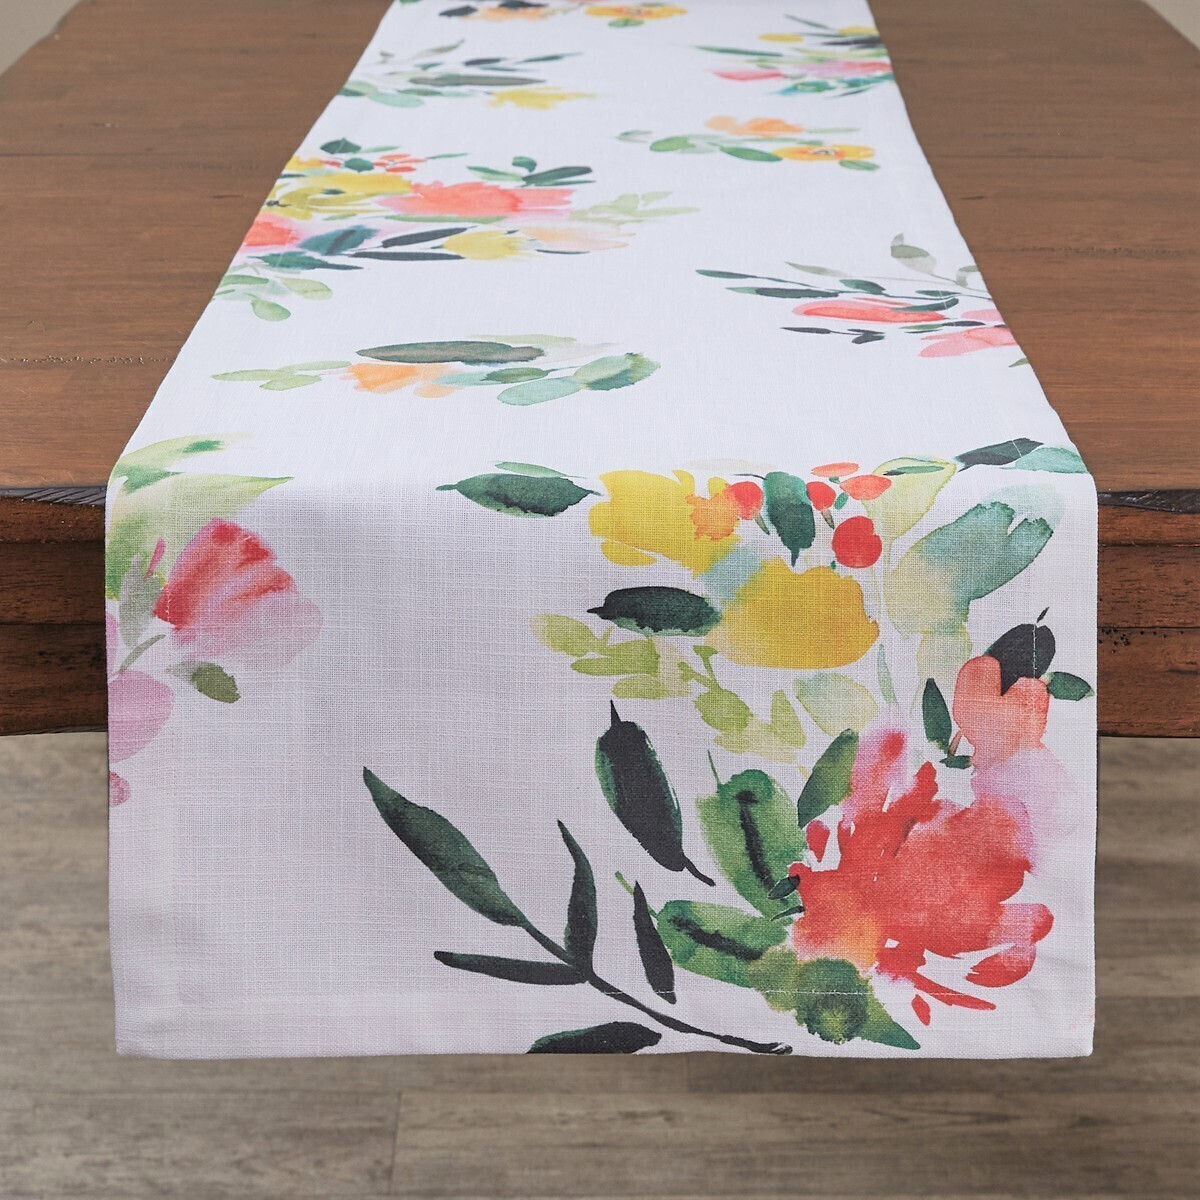 Happy Life Table Runner, 72"